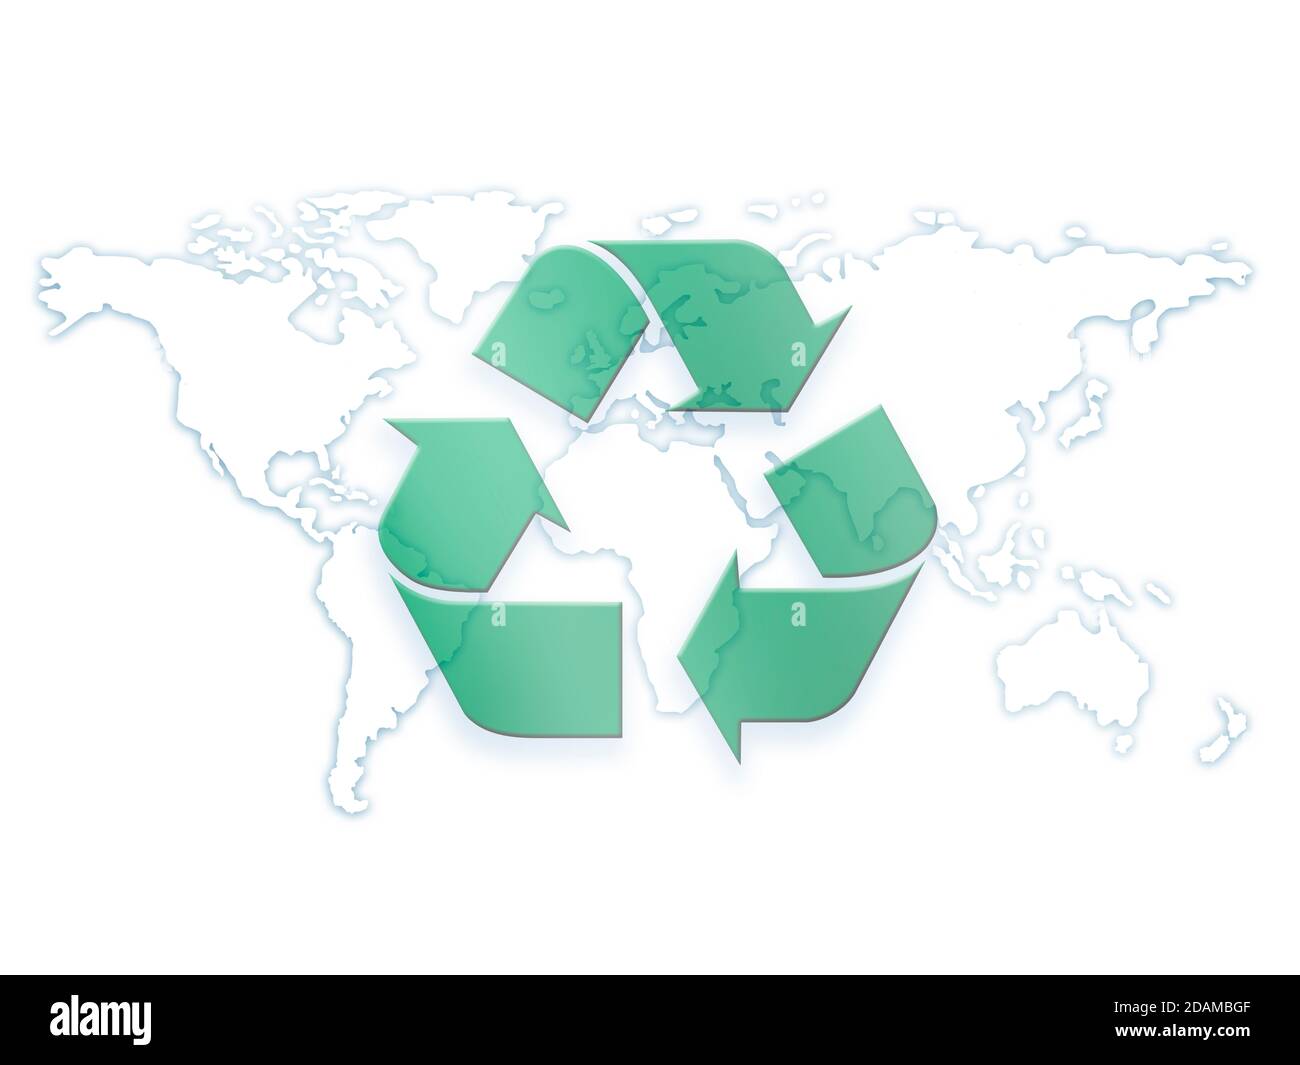 World map with recycling symbol, illustration. Stock Photo